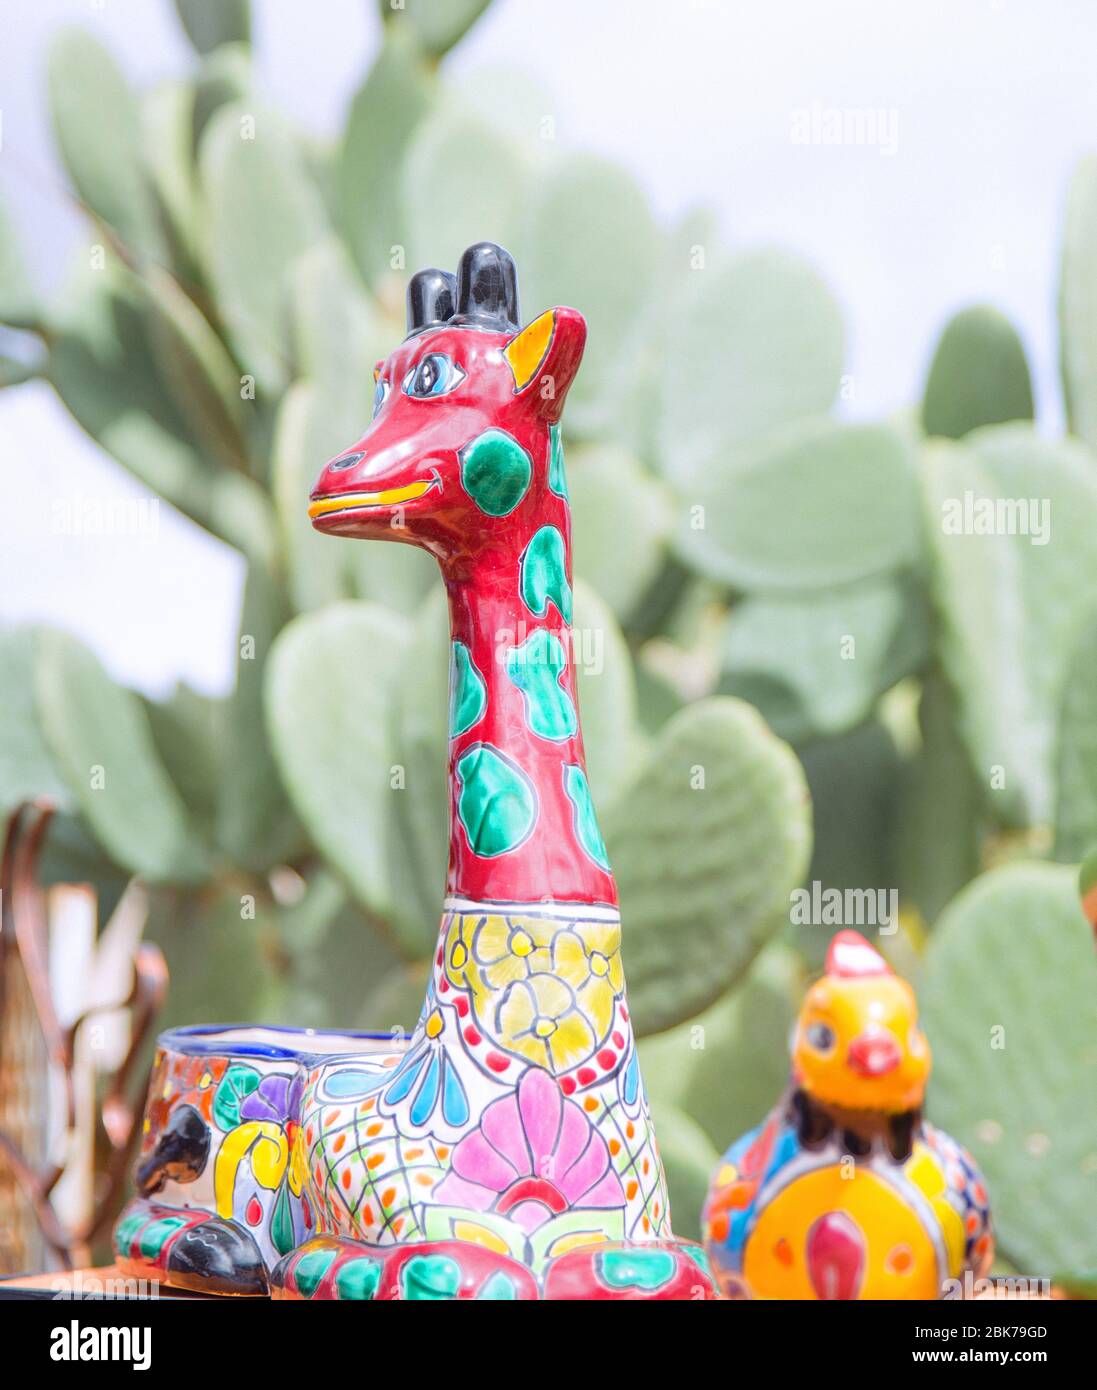 Ceramic giraffe with colorful paint Stock Photo